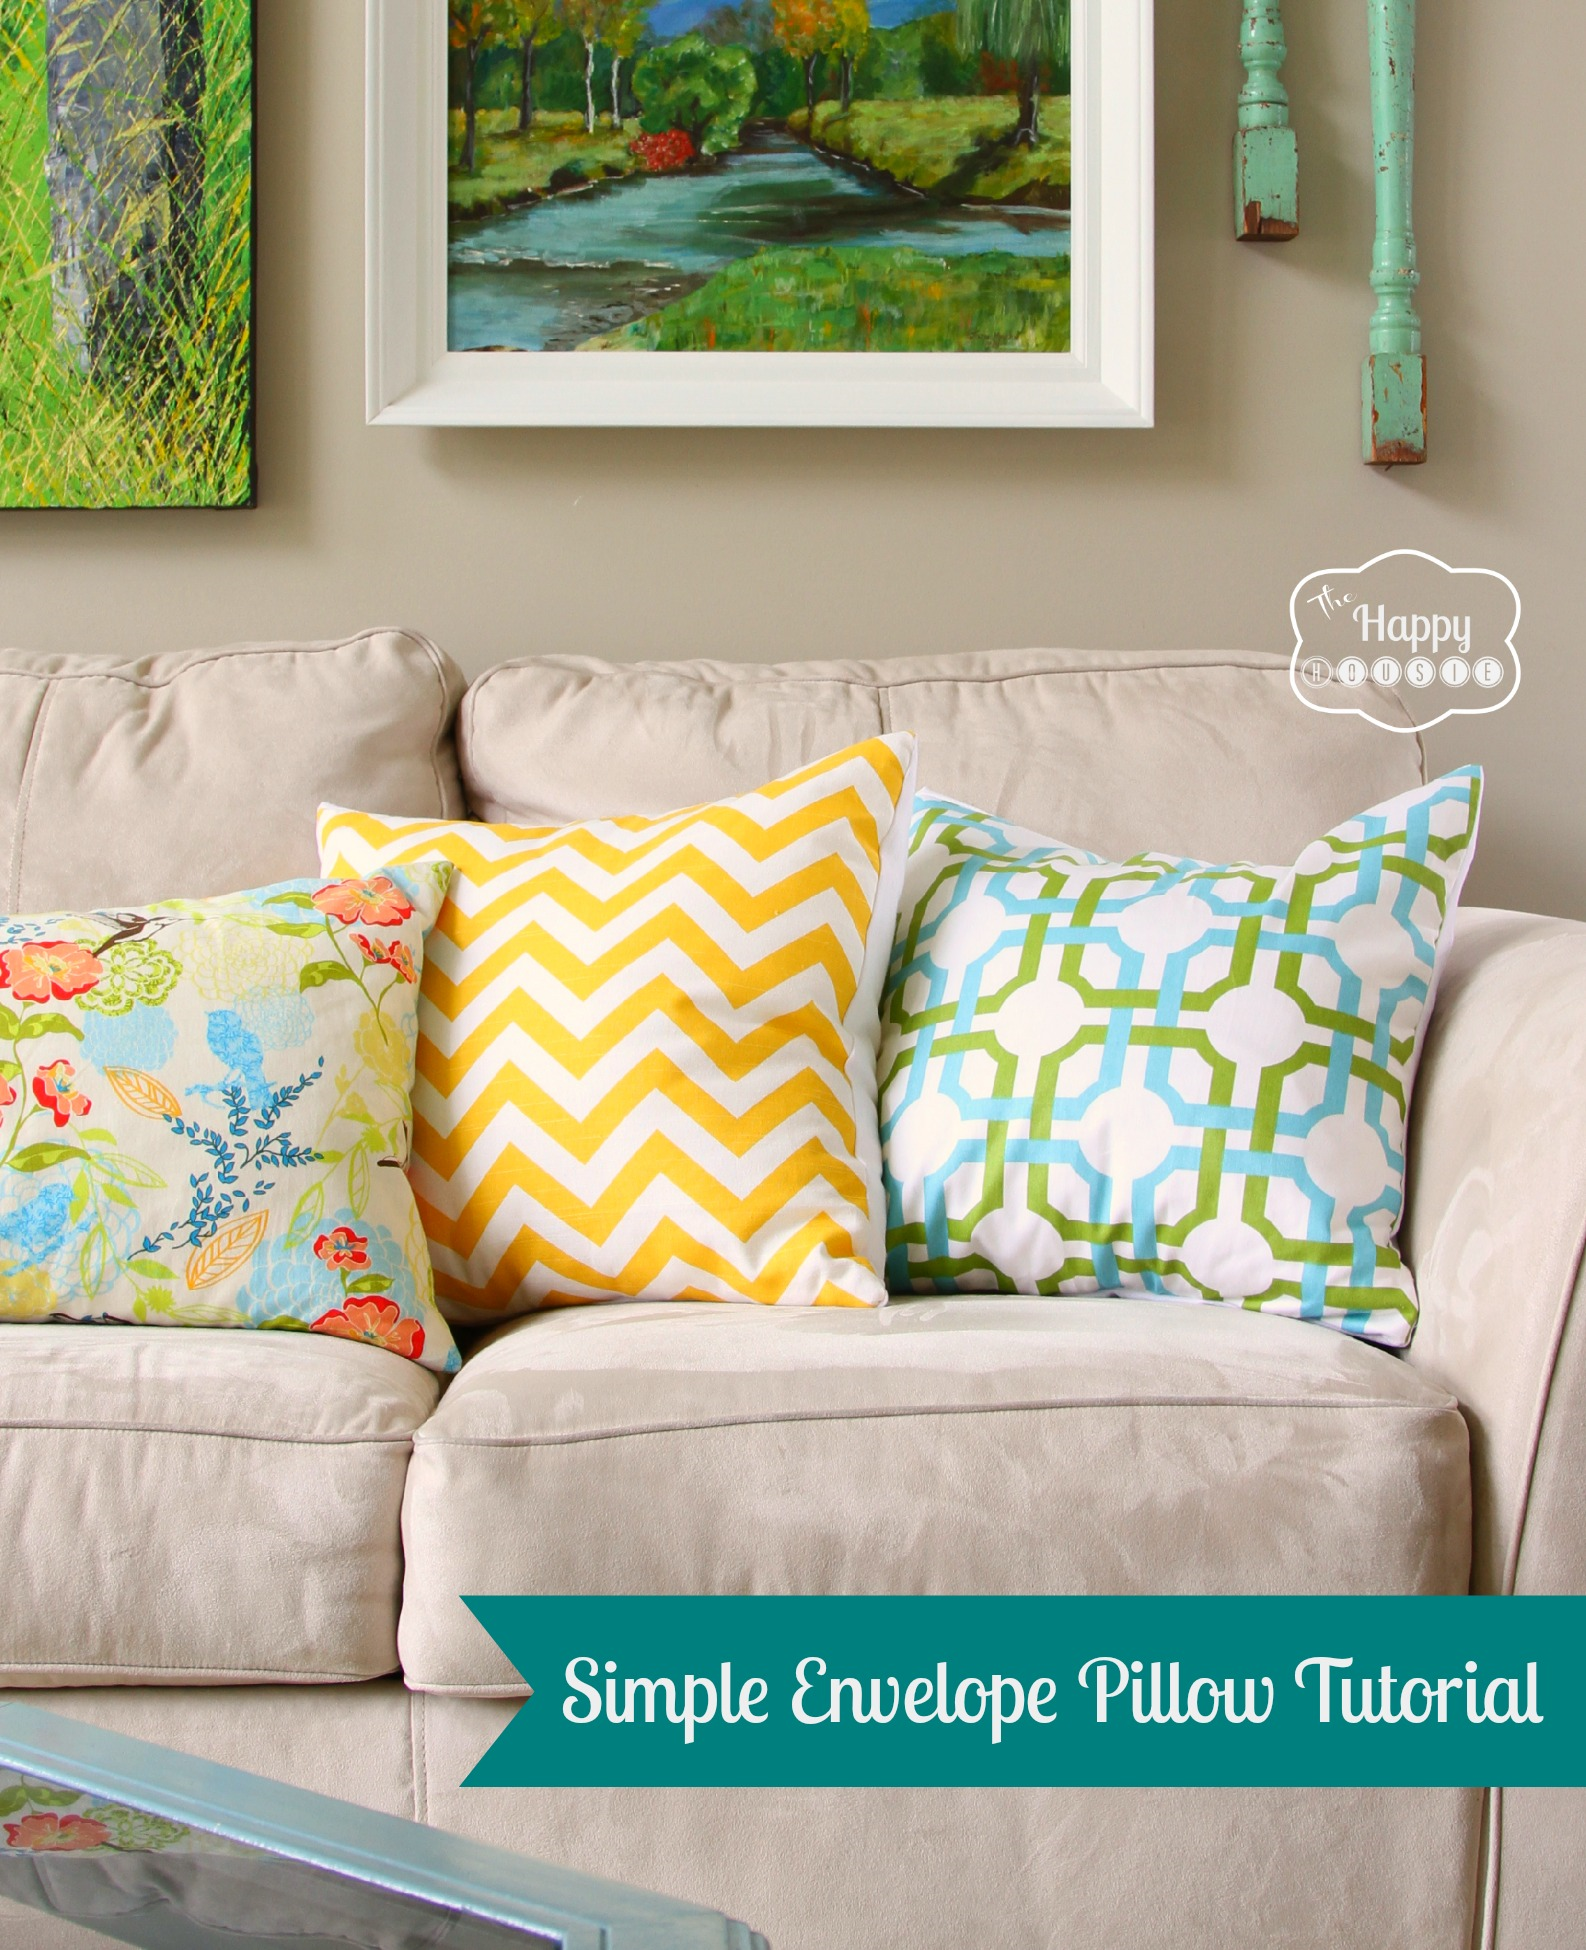 Simple, Speedy, and Stuffed: A Sewing Tutorial for DIY Envelope Pillows